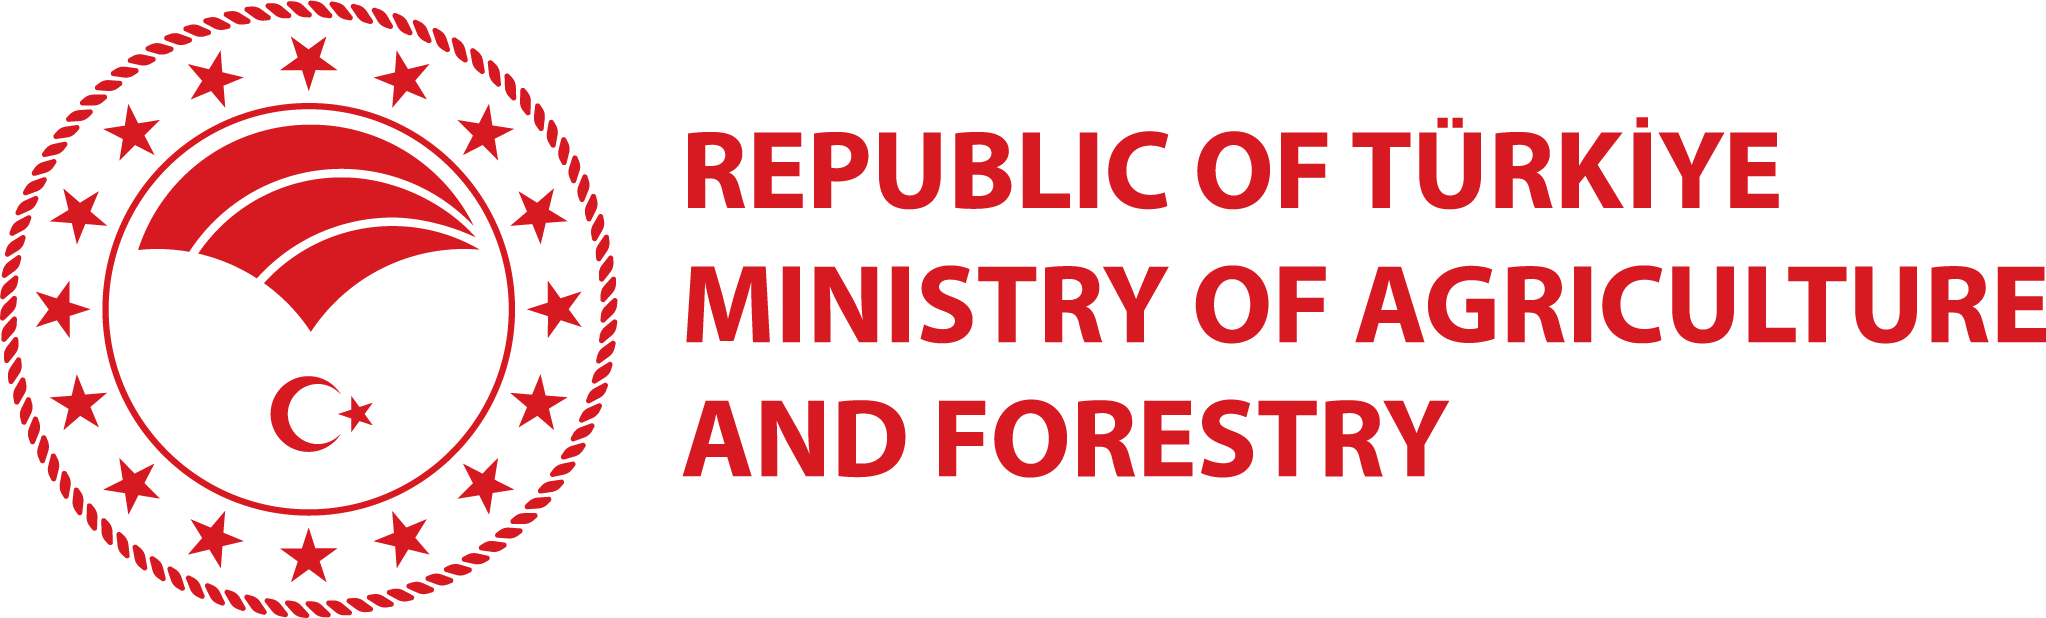 Republic of Türkiye - Ministry of Agriculture and Forestry